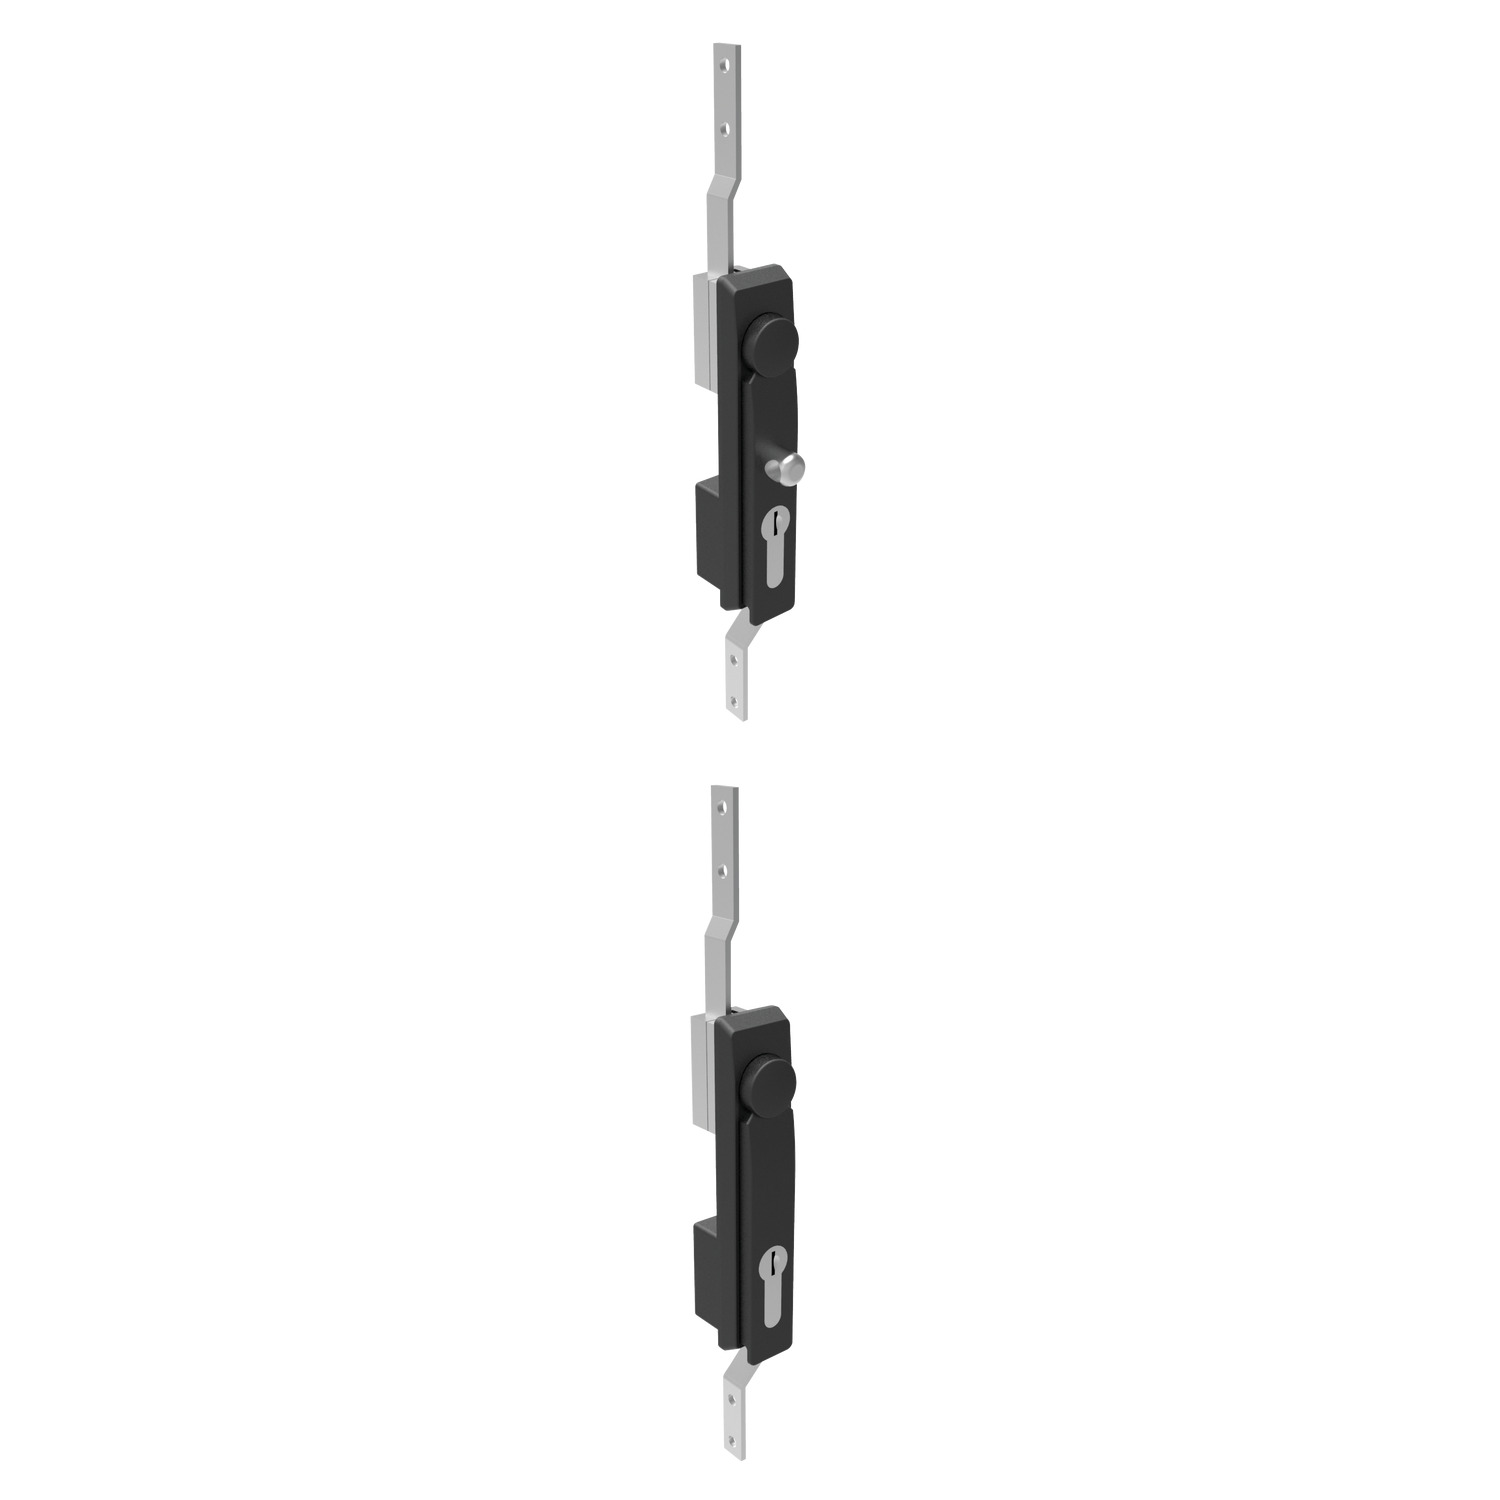 Swing Handles - with Rod Control 90o swing handle rotation combines with rod control system to open or close. For use inside the cabinet or enclosure gasket